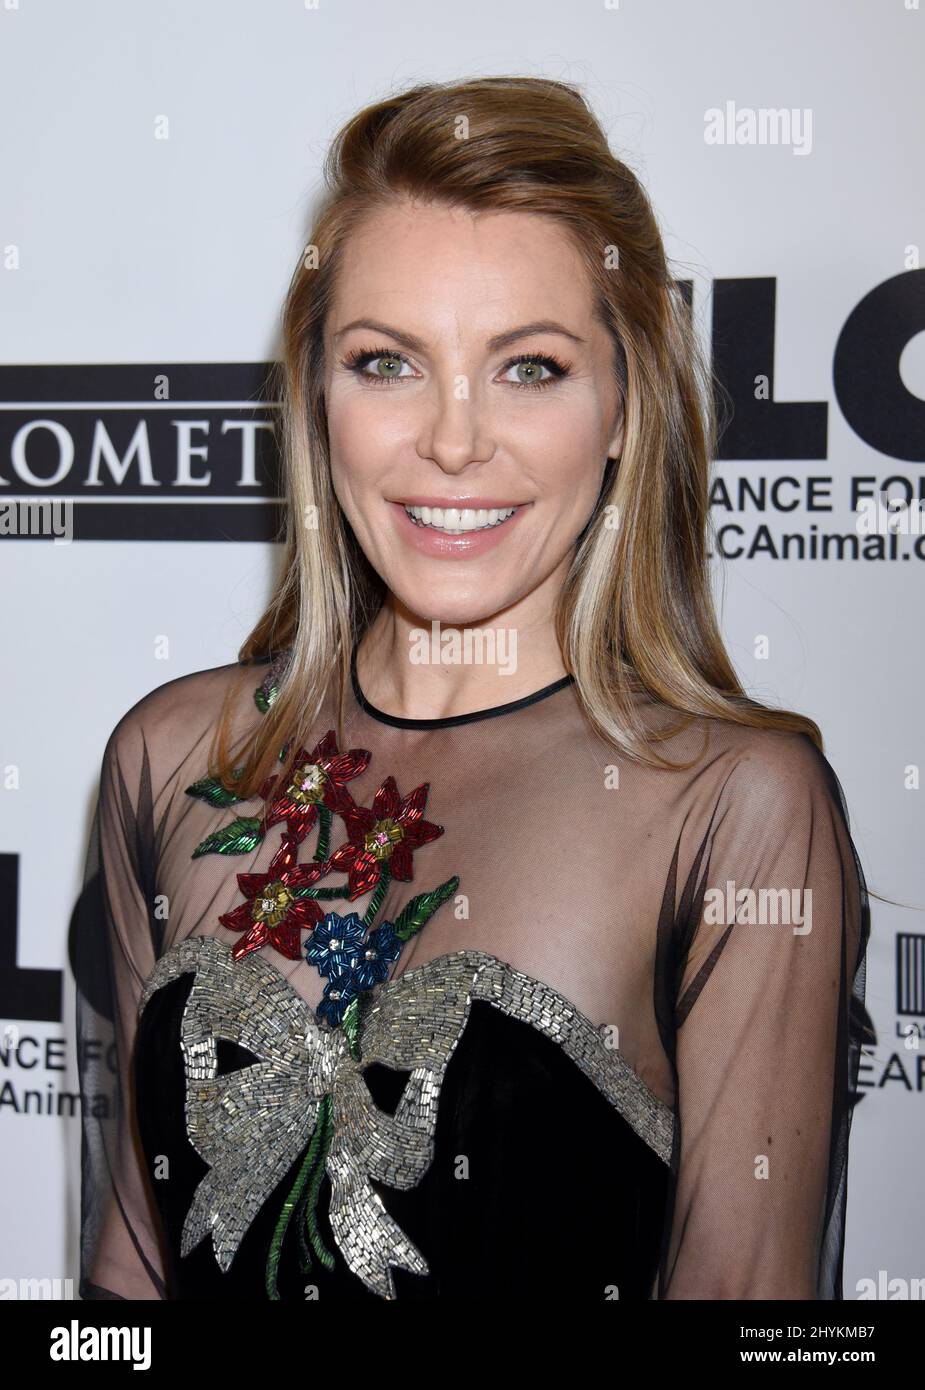 Chrystal Hefner at the Last Chance For Animals 35th Anniversary Gala ...